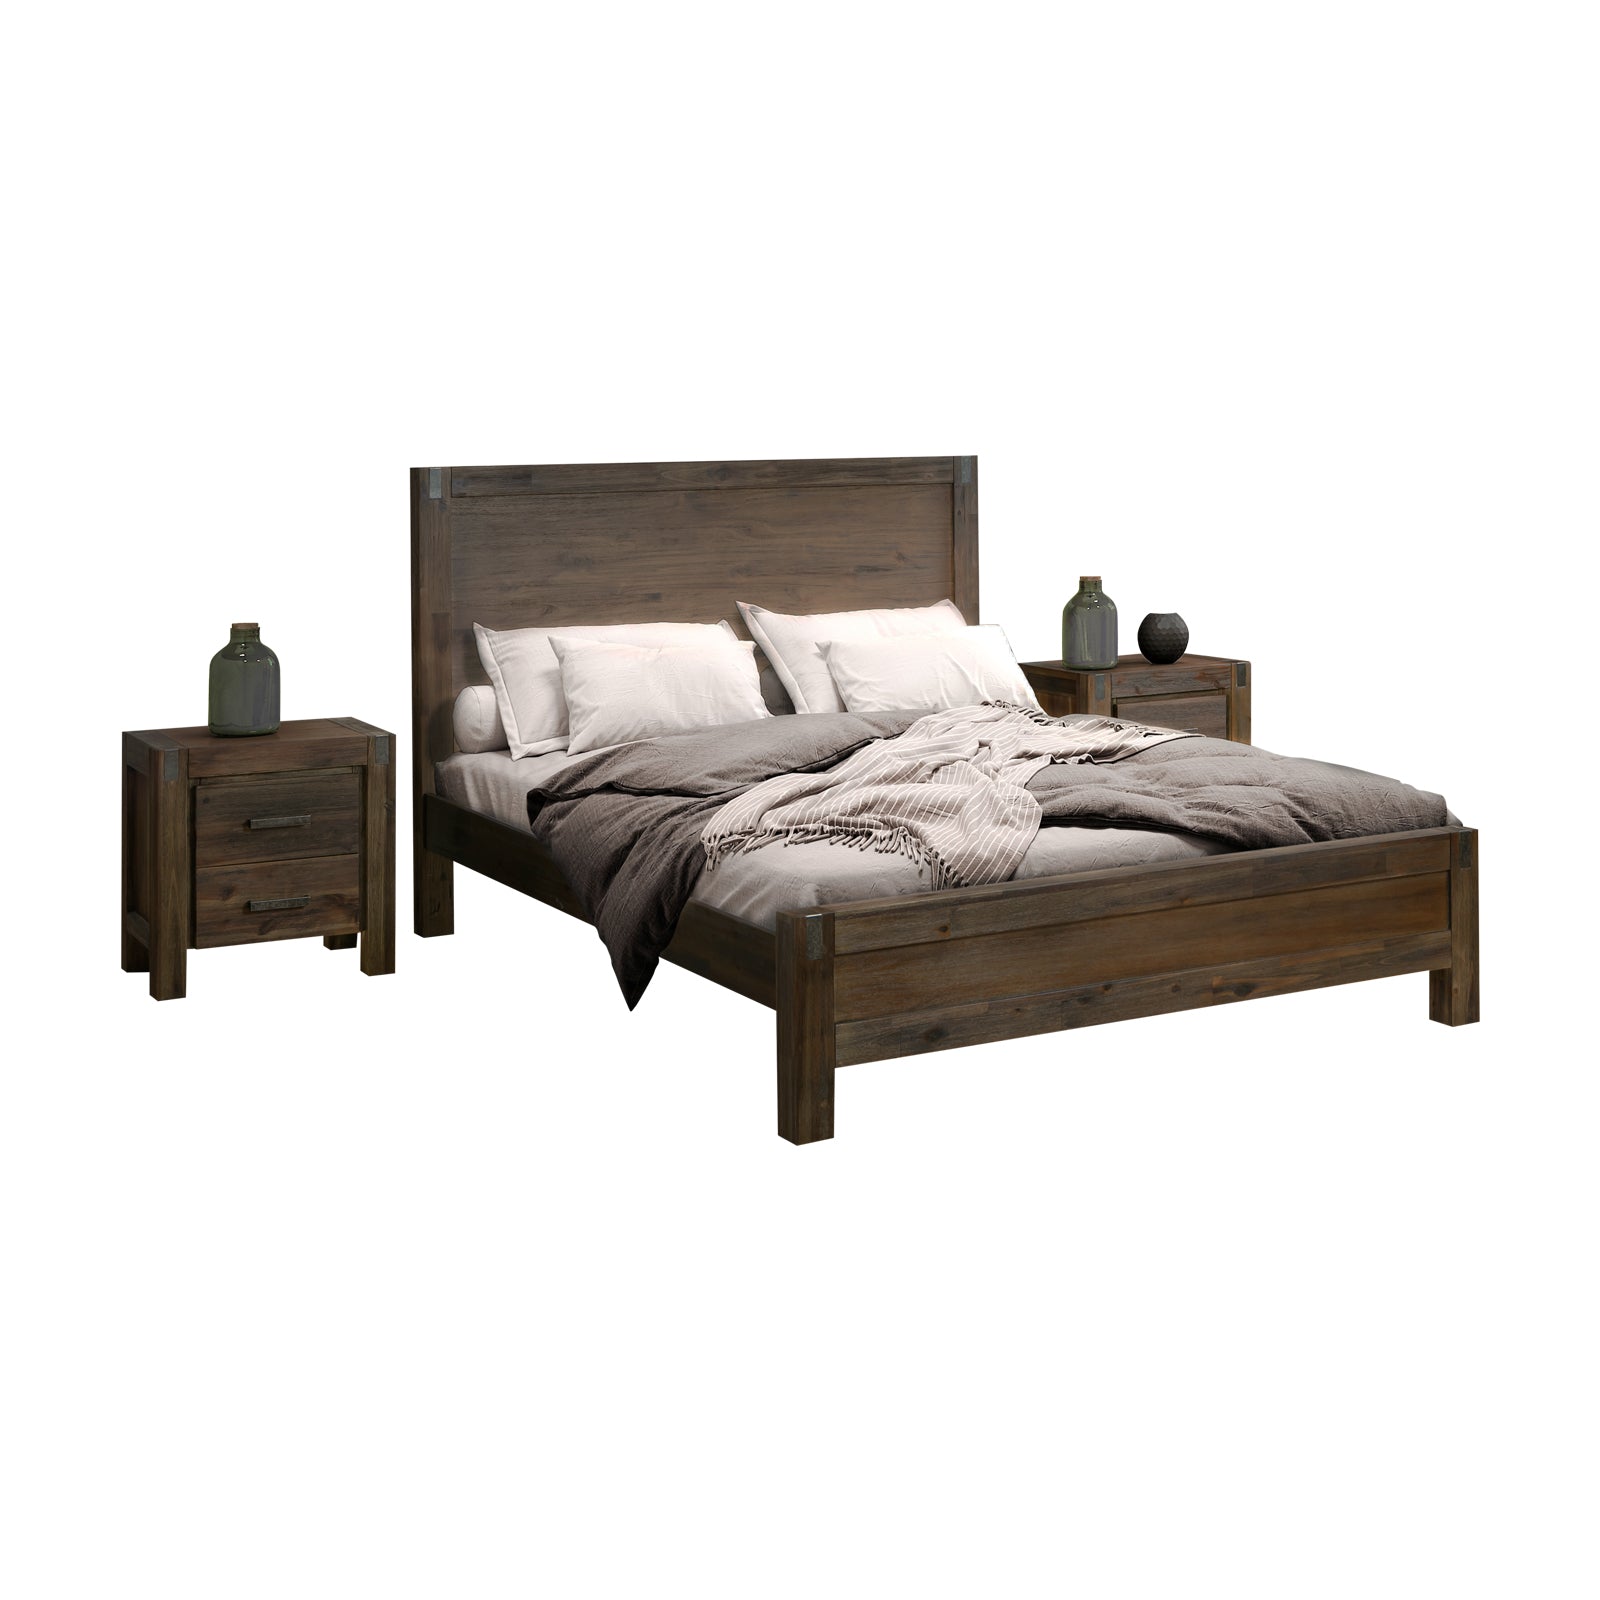 4 Pieces Bedroom Suite in Solid Wood Veneered Acacia Construction Timber Slat Double Size Chocolate Colour Bed, Bedside Table & Tallboy - SILBERSHELL